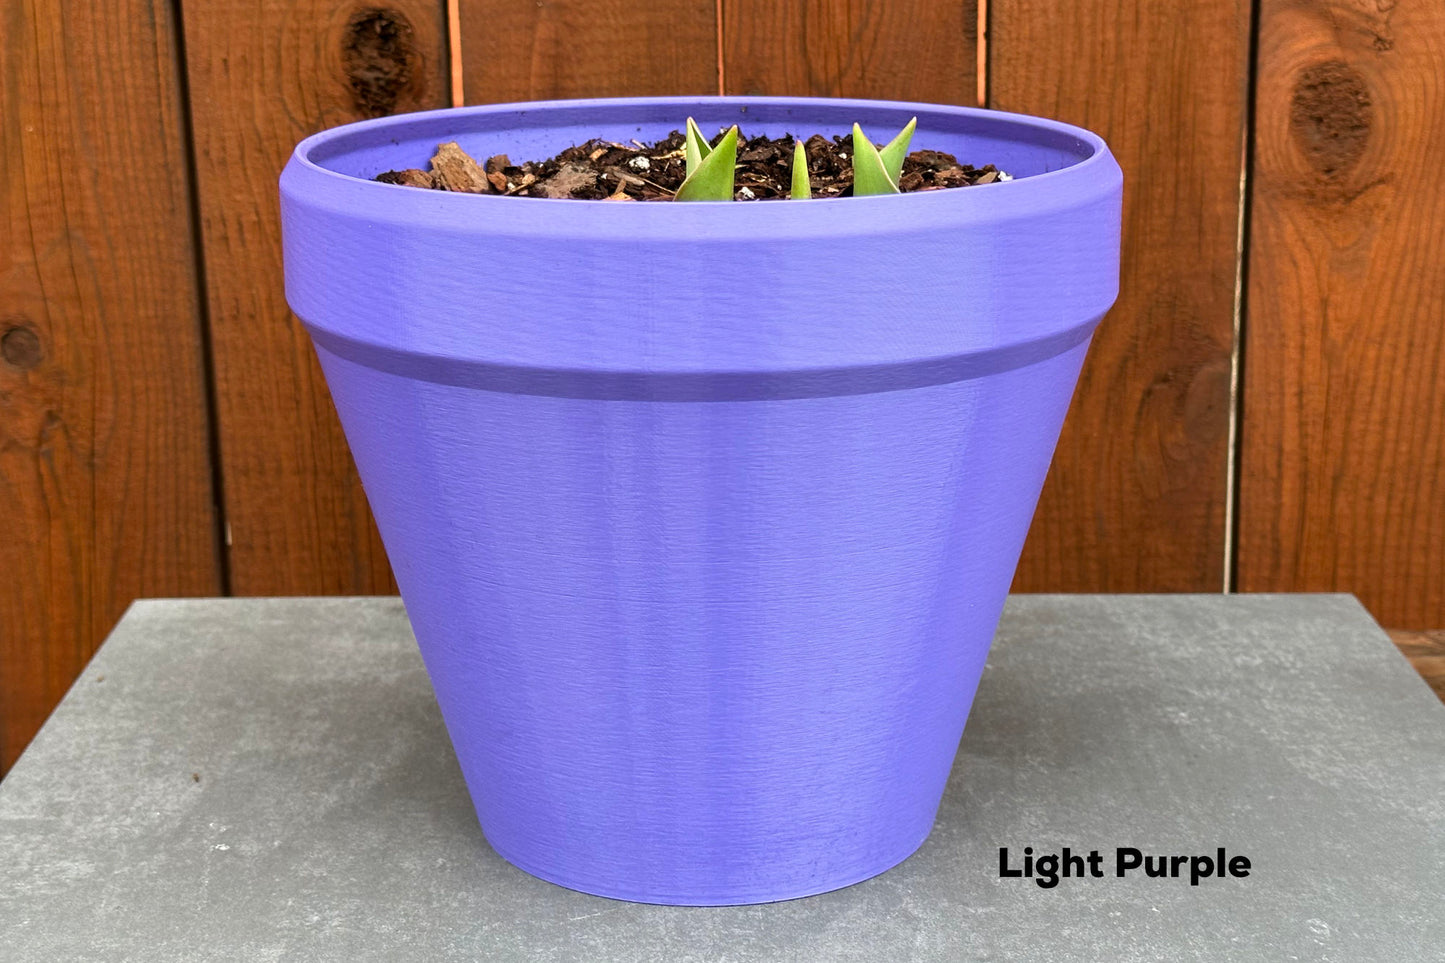 8-inch Round Plant Pot and Optional Saucer, 20+ Colors, Outdoor or Indoor